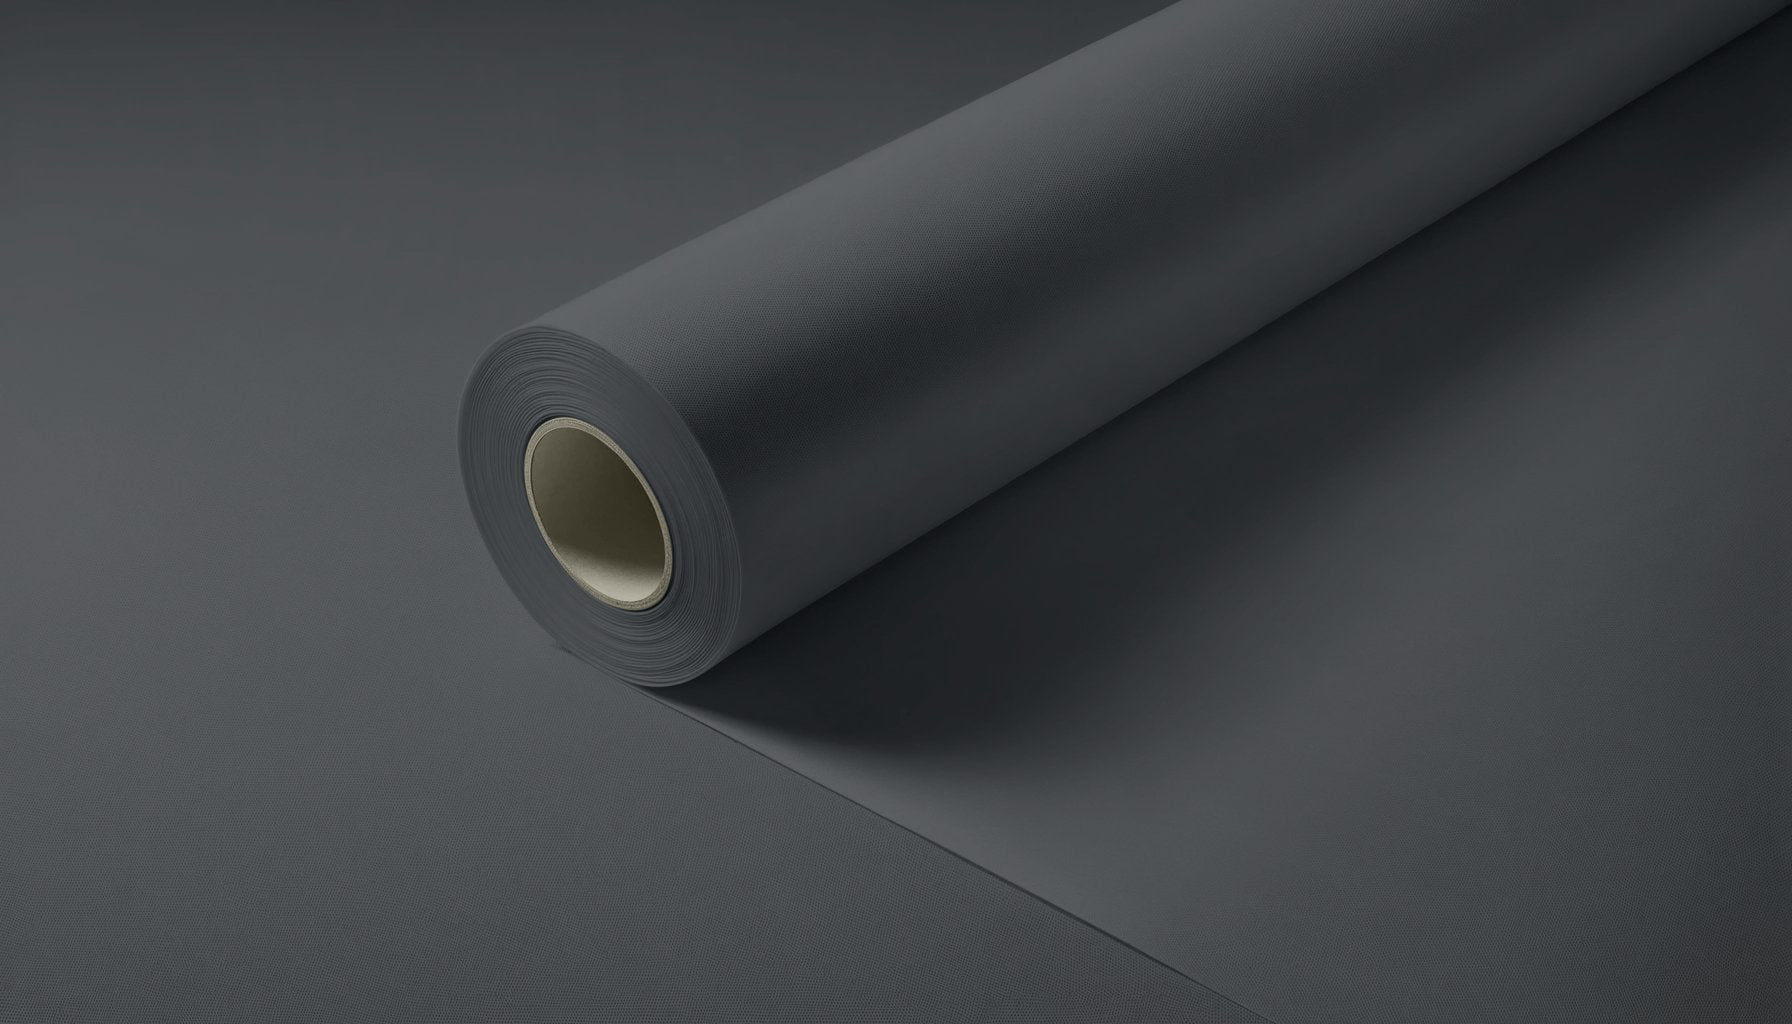 Peel & Stick Removable Re-usable Paint - Color RAL 7024 Graphite Grey - offRAL™ - RALRAW LLC, USA